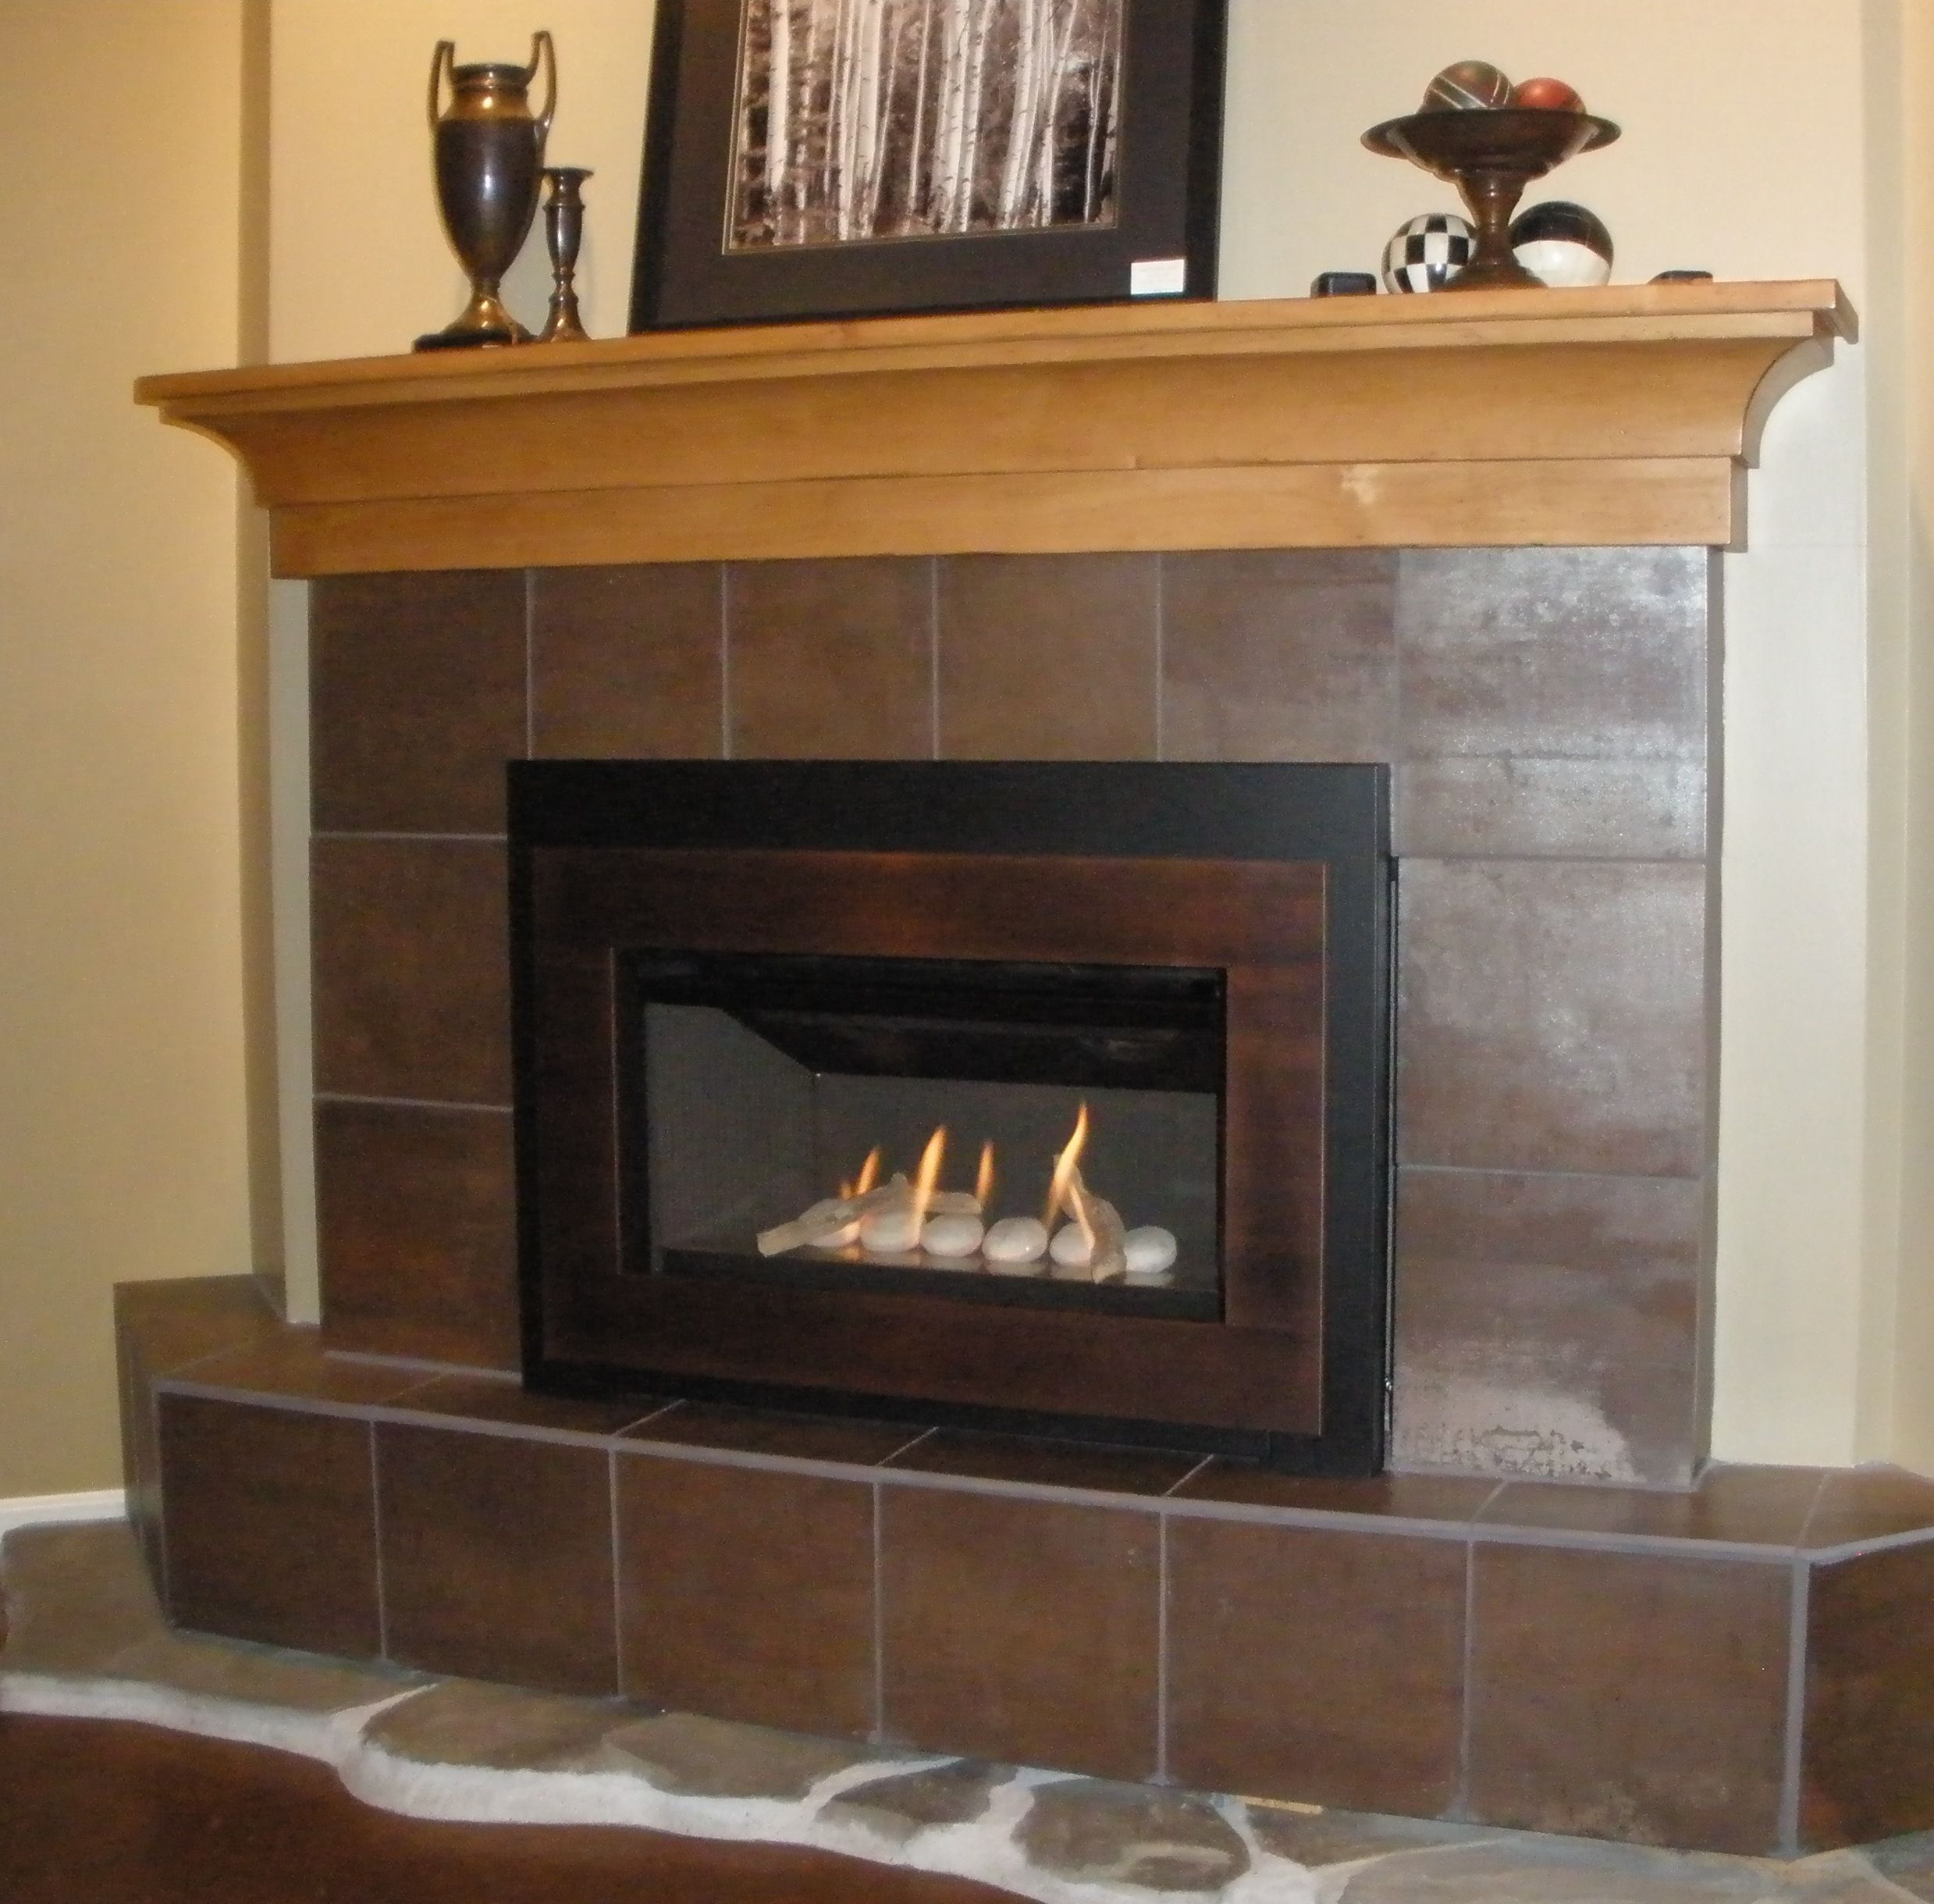 Gas Fireplace Rocks New Pin On Valor Radiant Gas Fireplaces Midwest Dealer